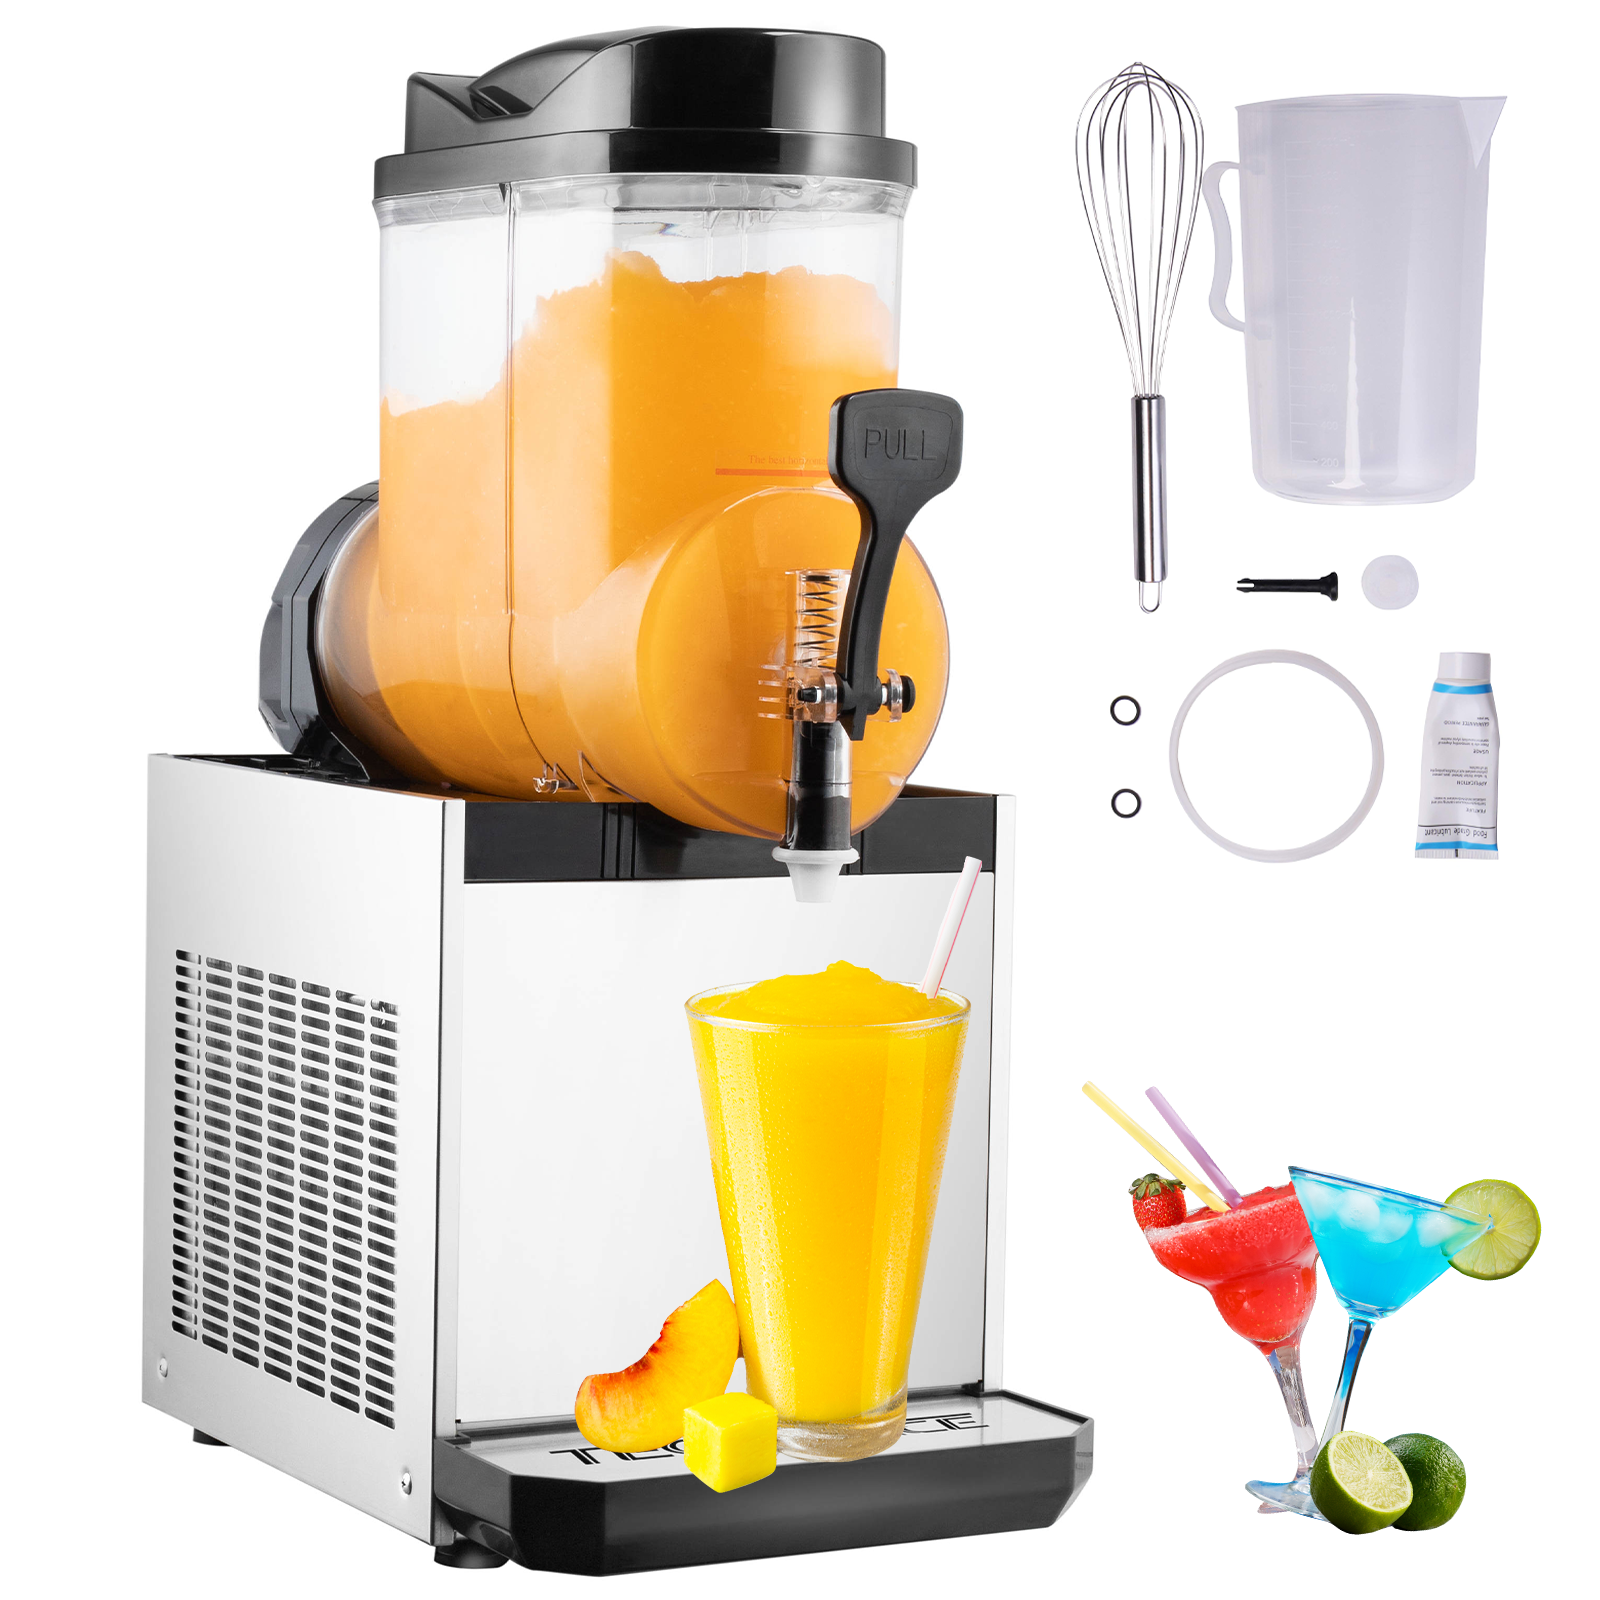 TECSPACE 110V Commercial Slushy Machine,15/30/45L Stainless Steel Margarita  Smoothie Frozen Drink Maker for Ice Juice Tea Coffee Making, Sliver